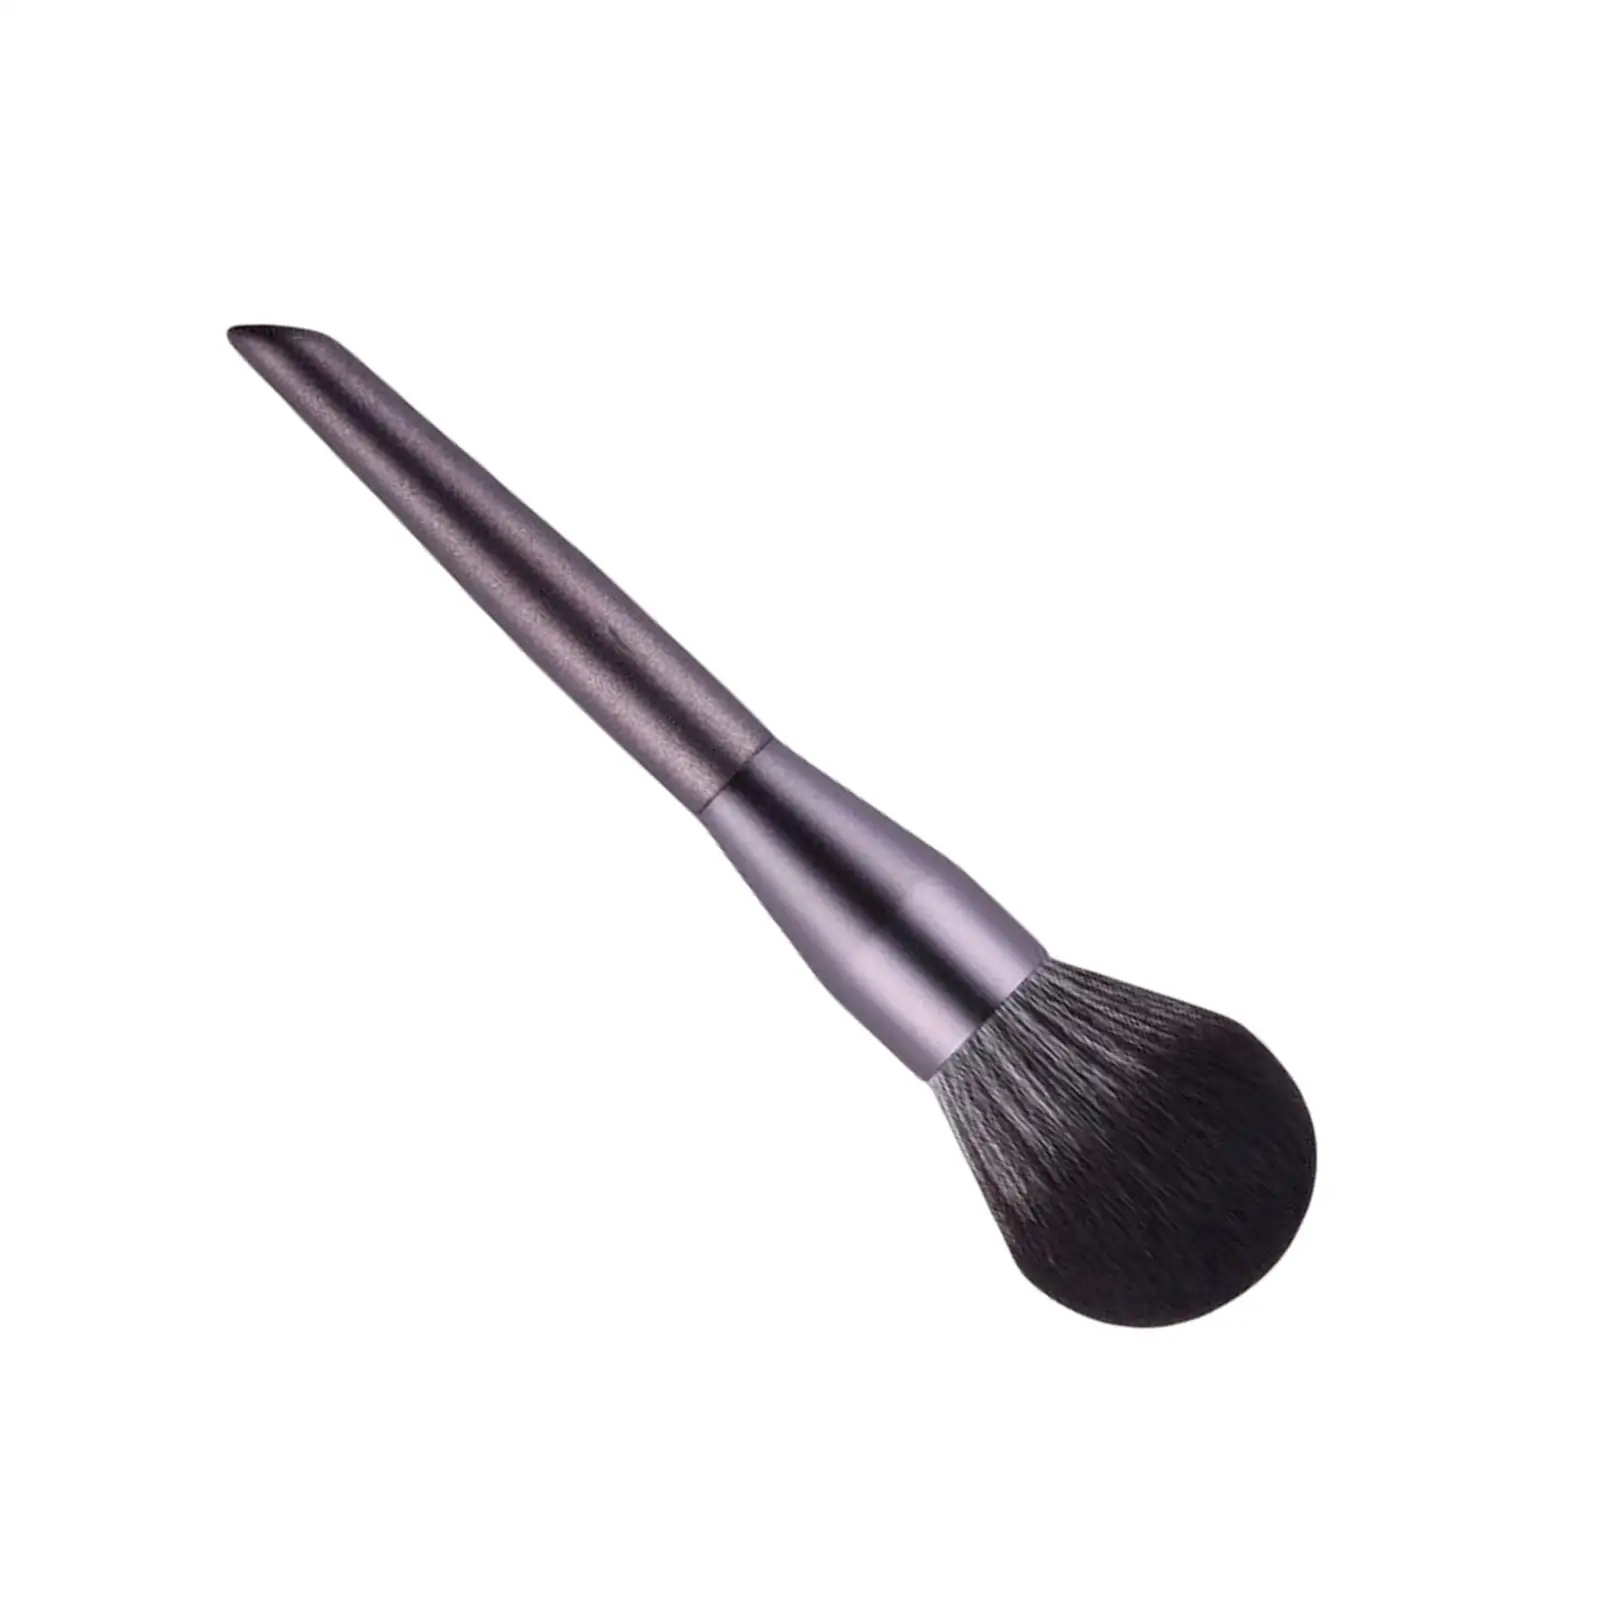  Brush Makeup Tool Compact Portable Face Brush Soft for Setting 